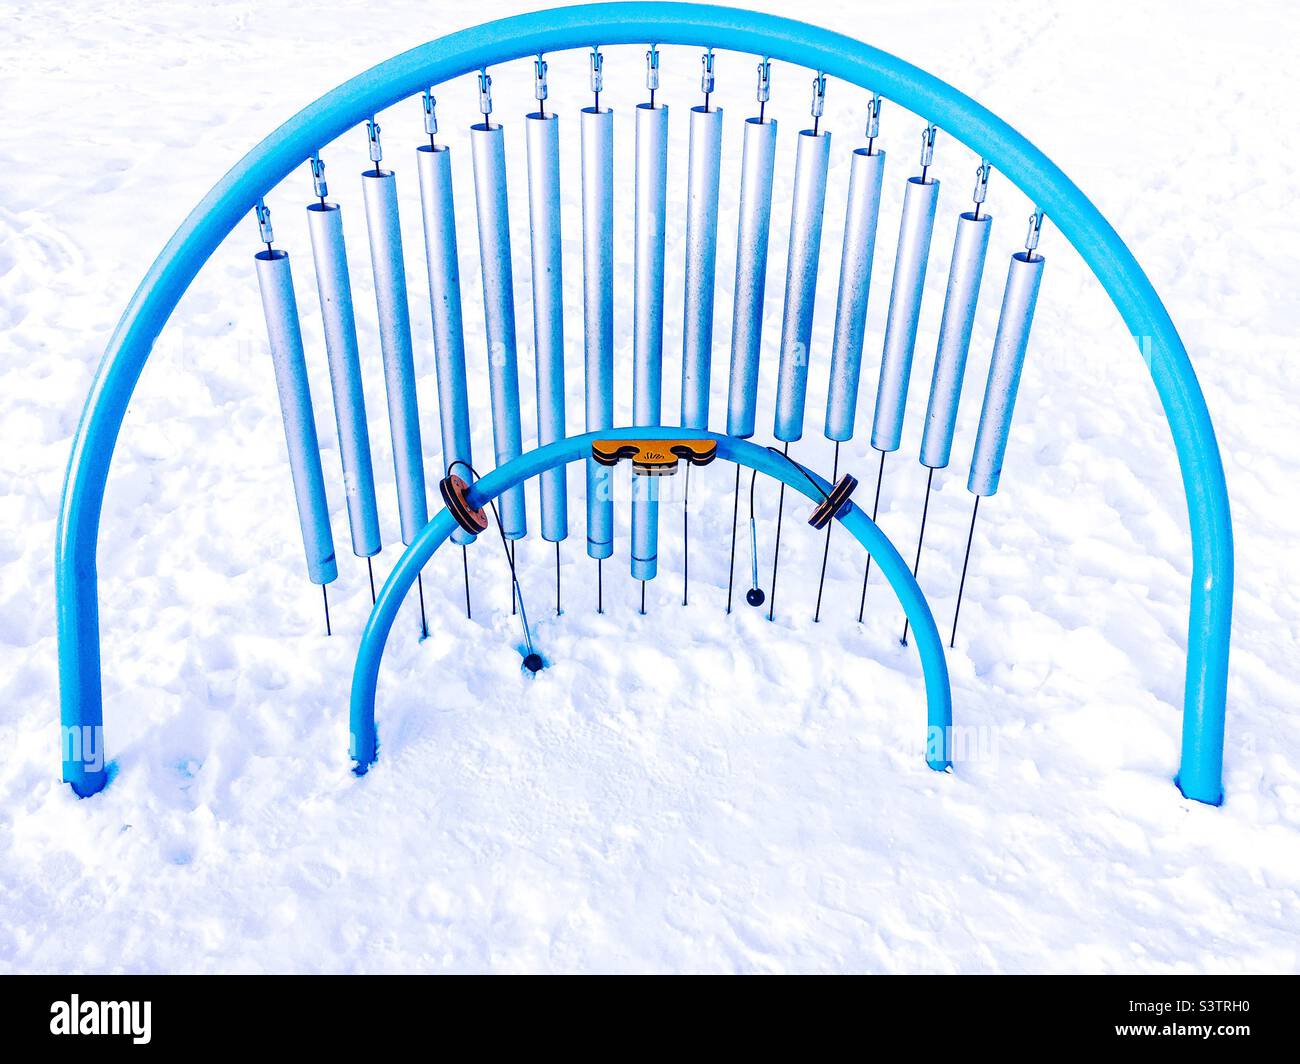 Musical apparatus in snow, outdoors, Ontario, Canada. Music in all seasons, all weathers. Stock Photo